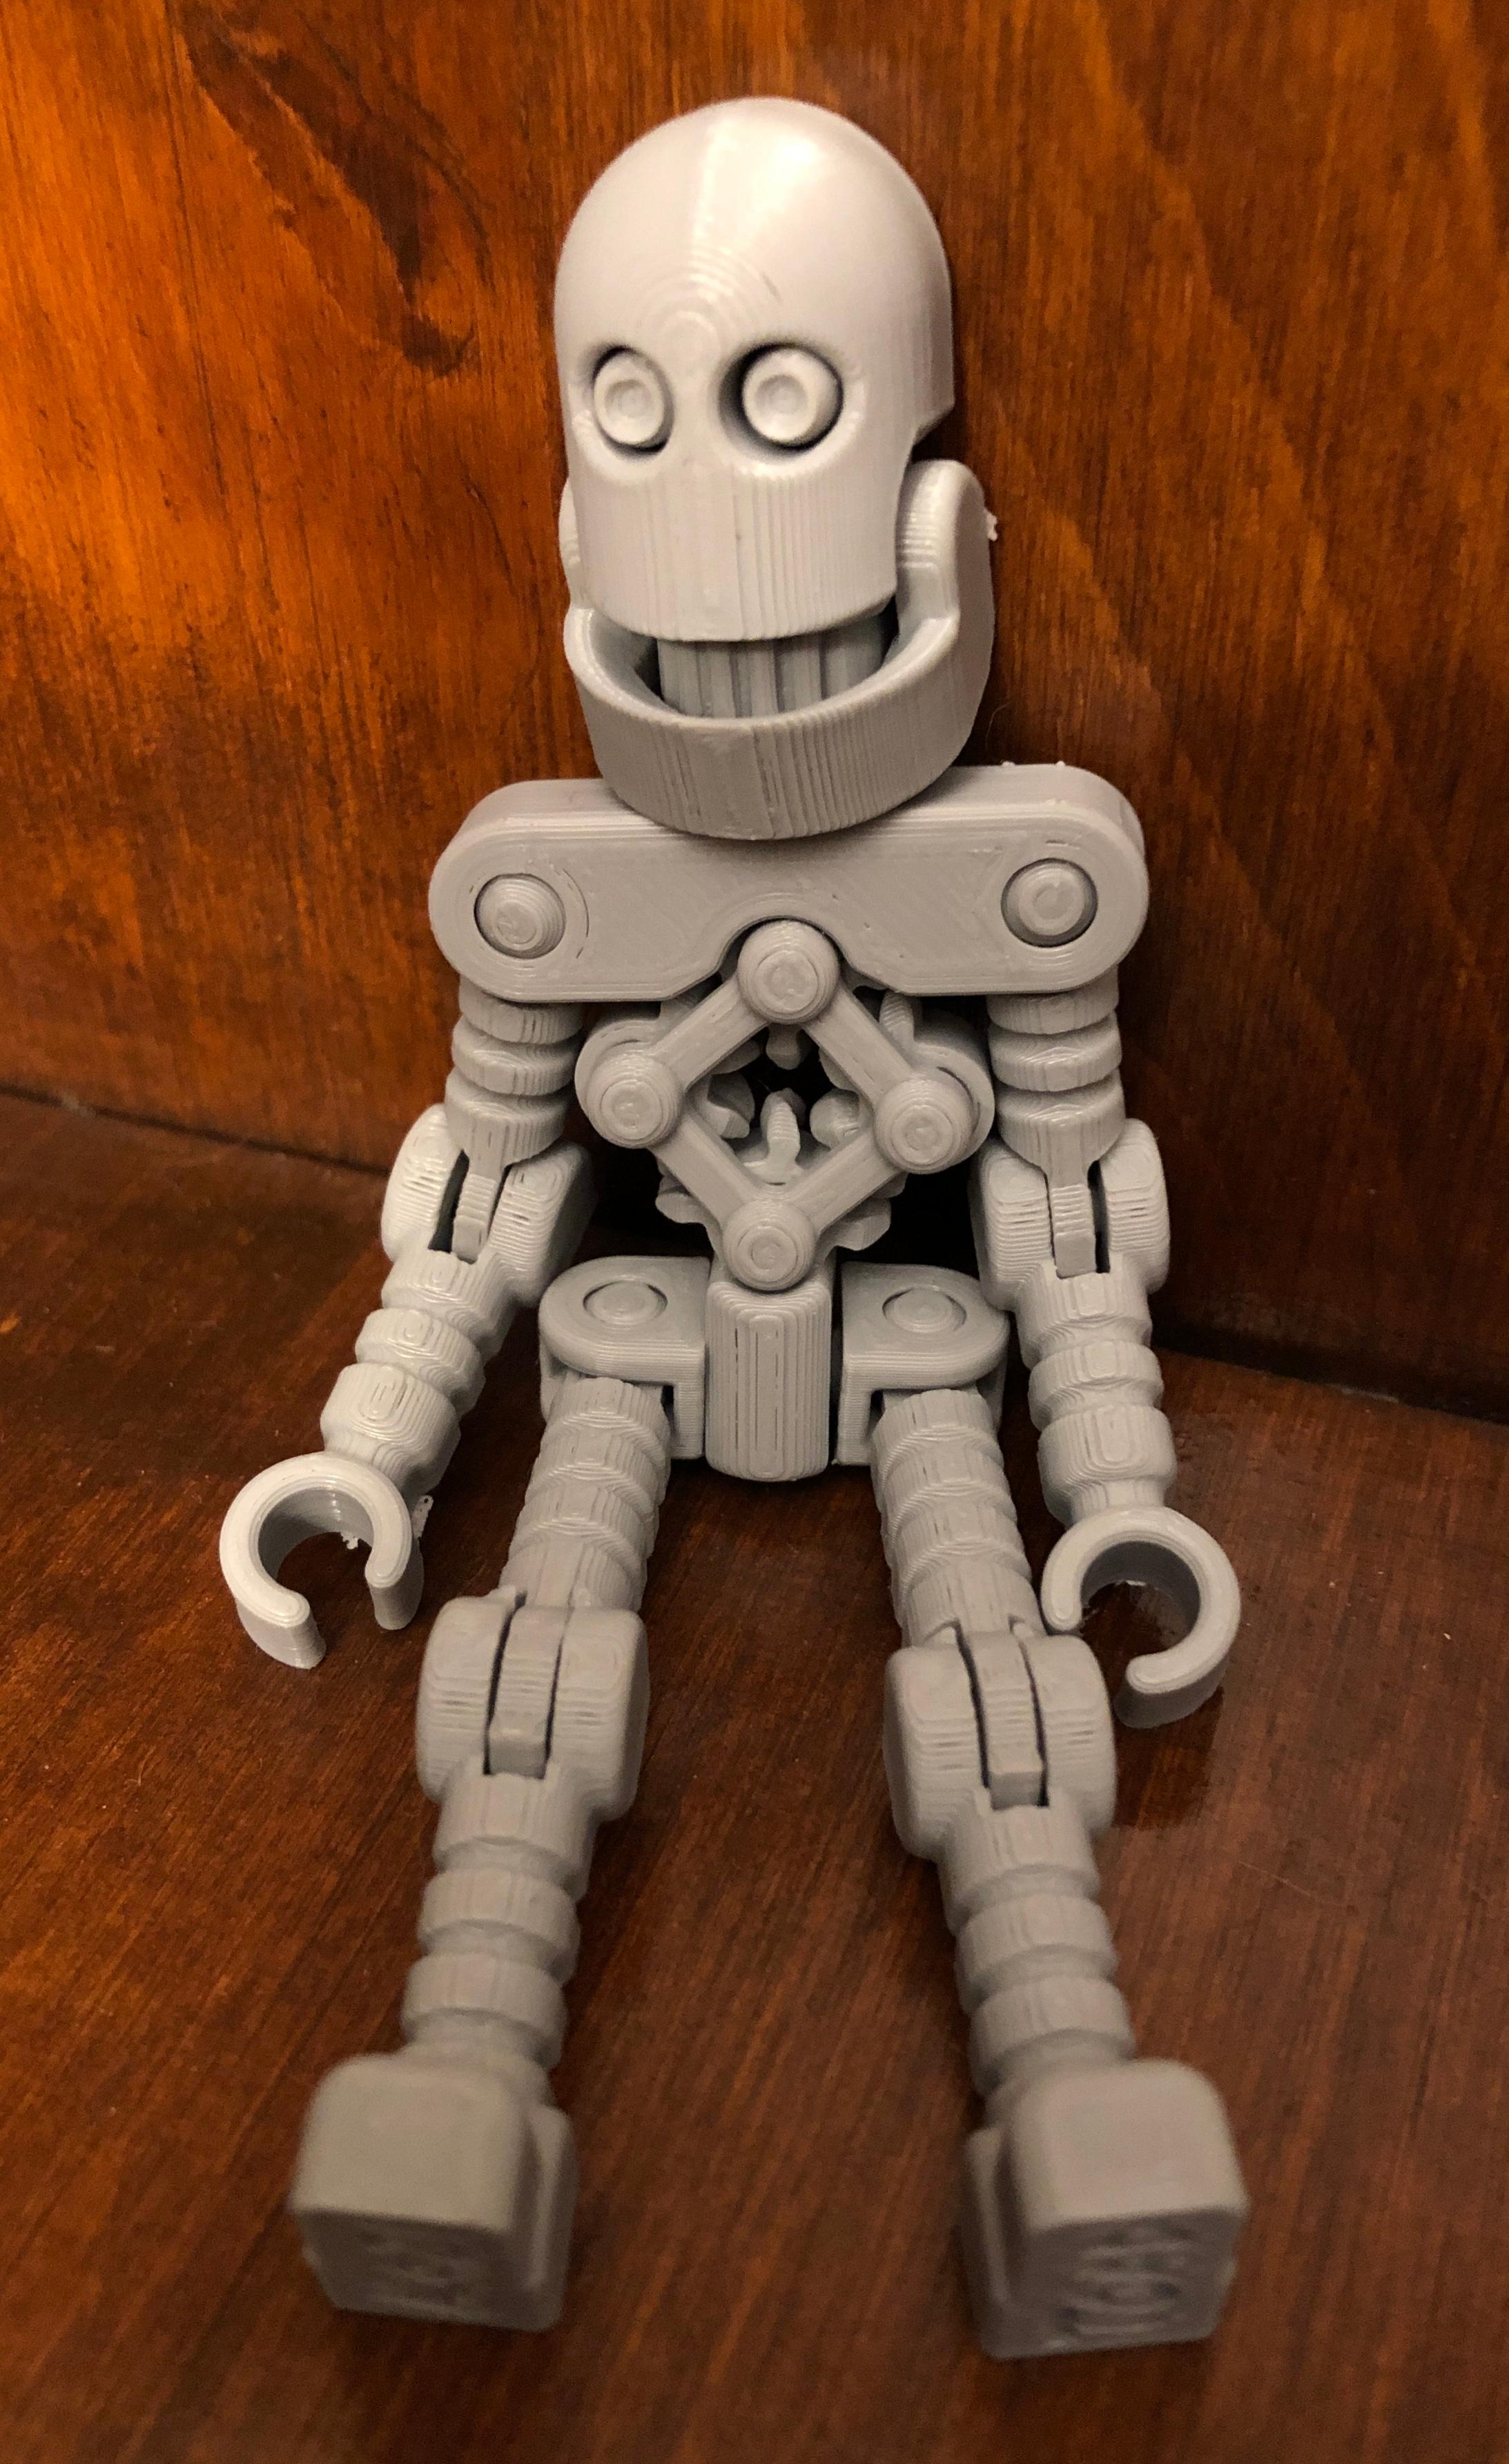 Benchmark Bot - First try with suggested settings on an Ender 3 Pro. All joints work. One hip joint was tight, but then broke free and works fine. This is a great model. Thank you for sharing it. I'm printing the accessories now :-) - 3d model